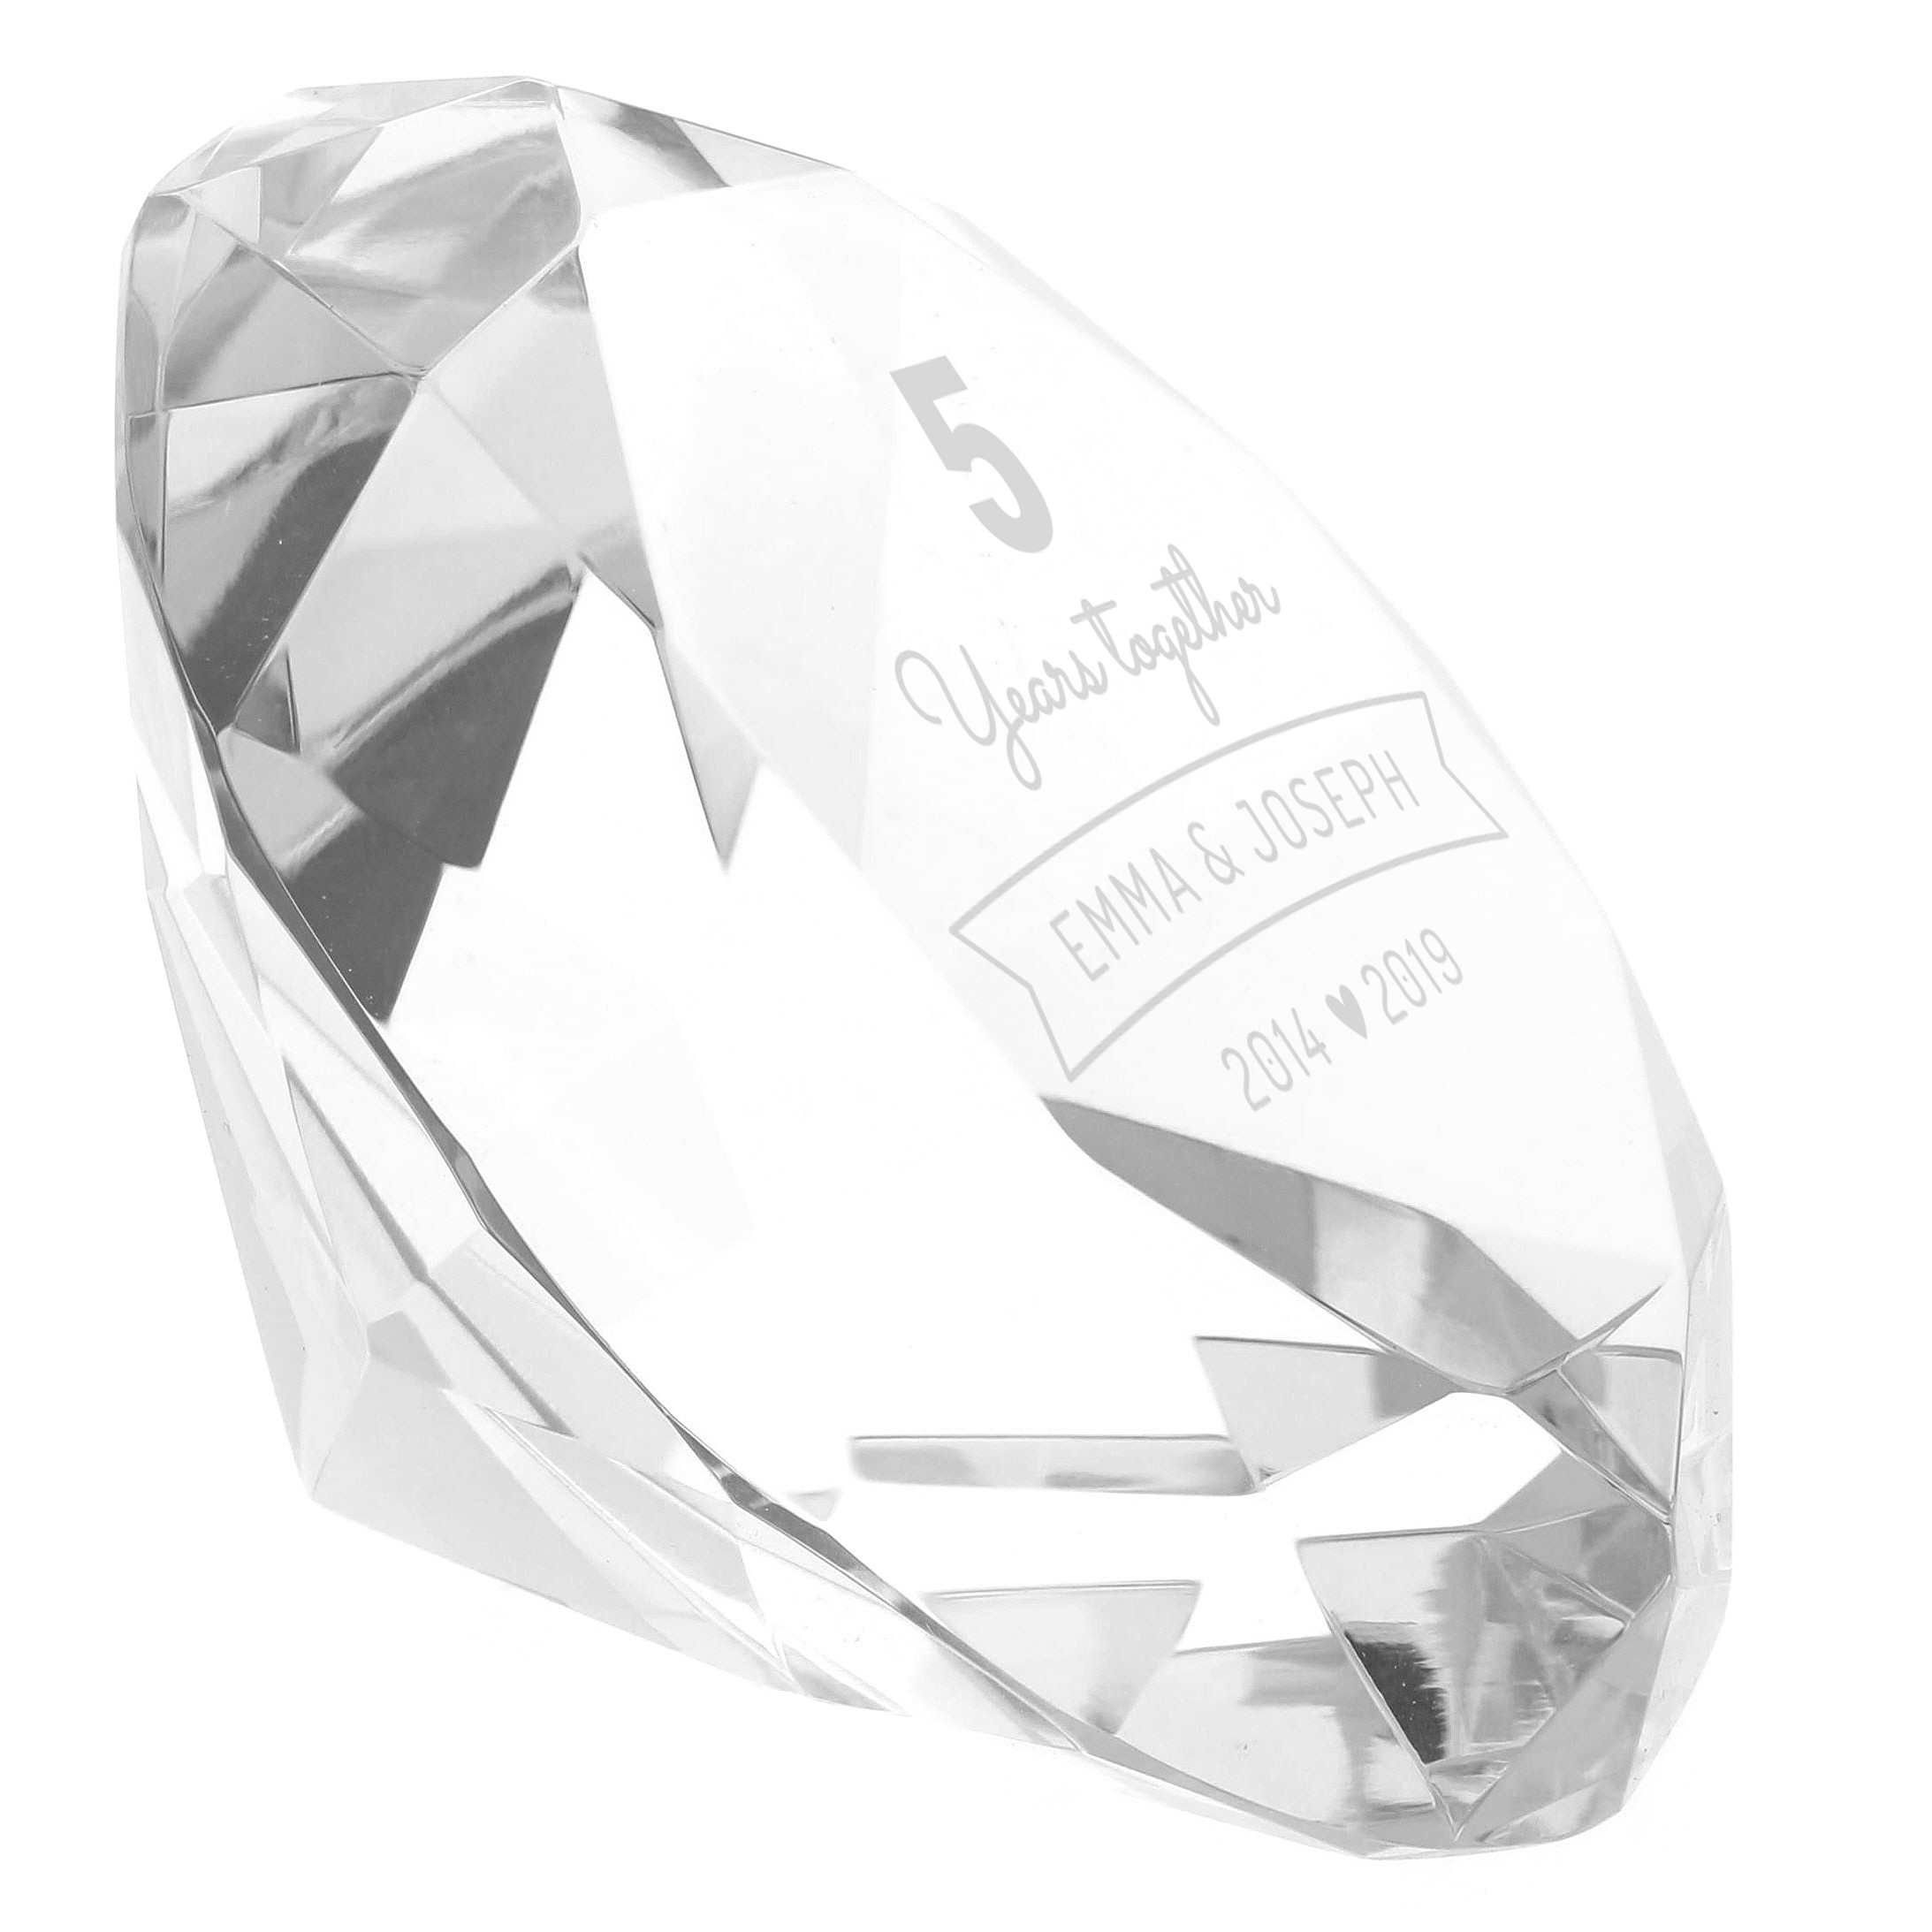 Personalised Anniversary Diamond Paperweight - Years Together 